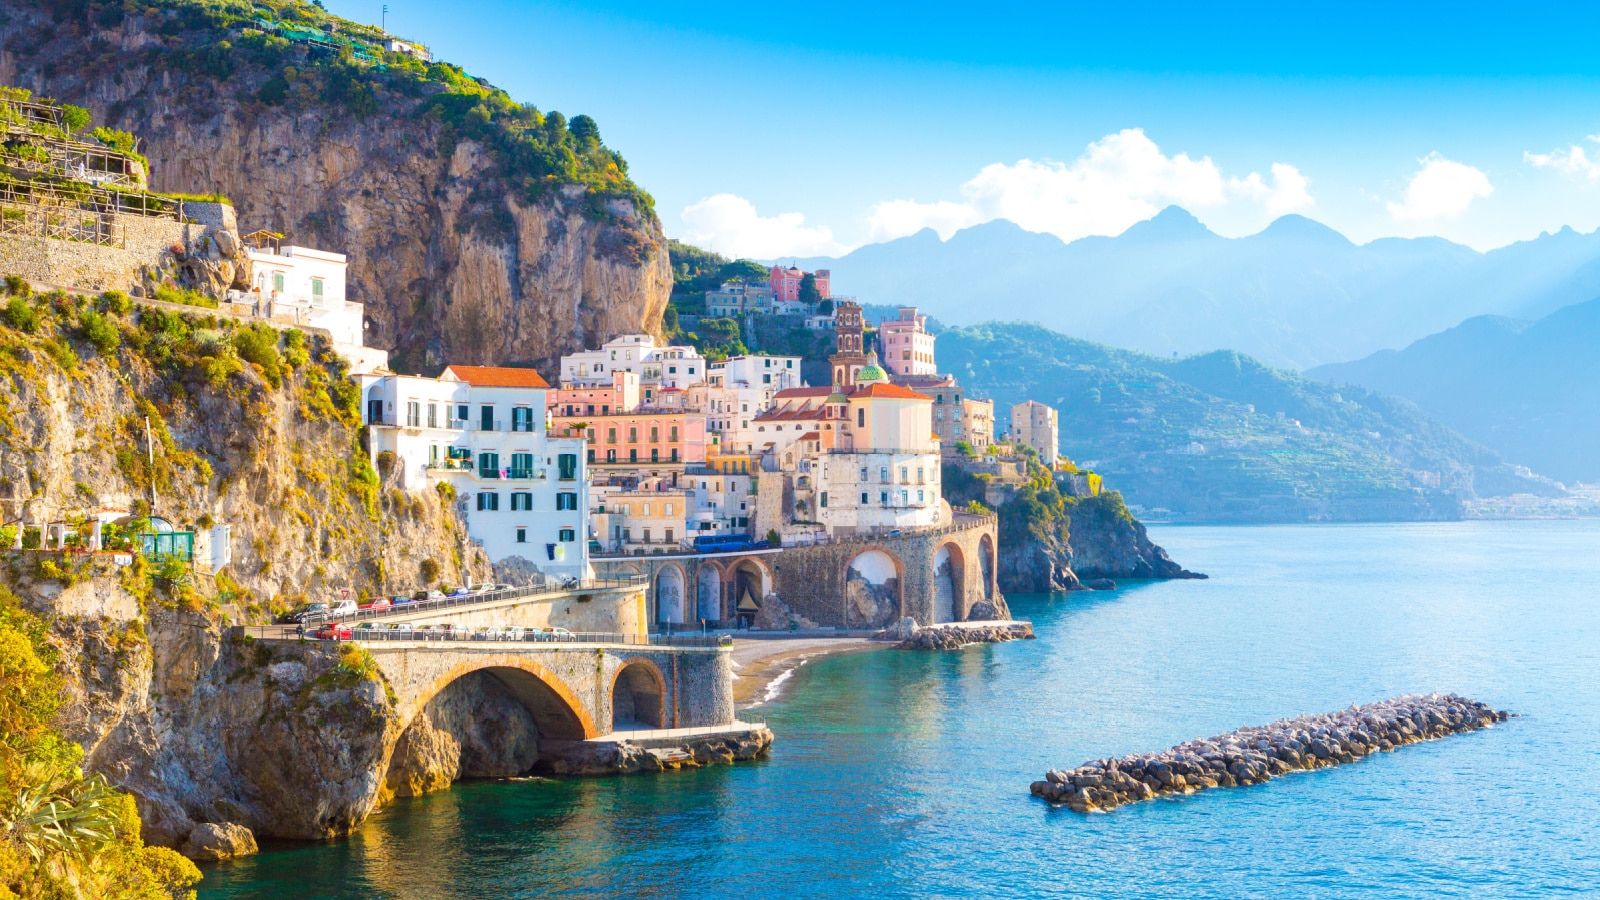 <p>The Amalfi Coast is a popular tourist destination located in the southern part of Italy, along the coastline of the Salerno Gulf. It is known for its stunning natural beauty, picturesque cliffside towns, and rich cultural heritage.</p>